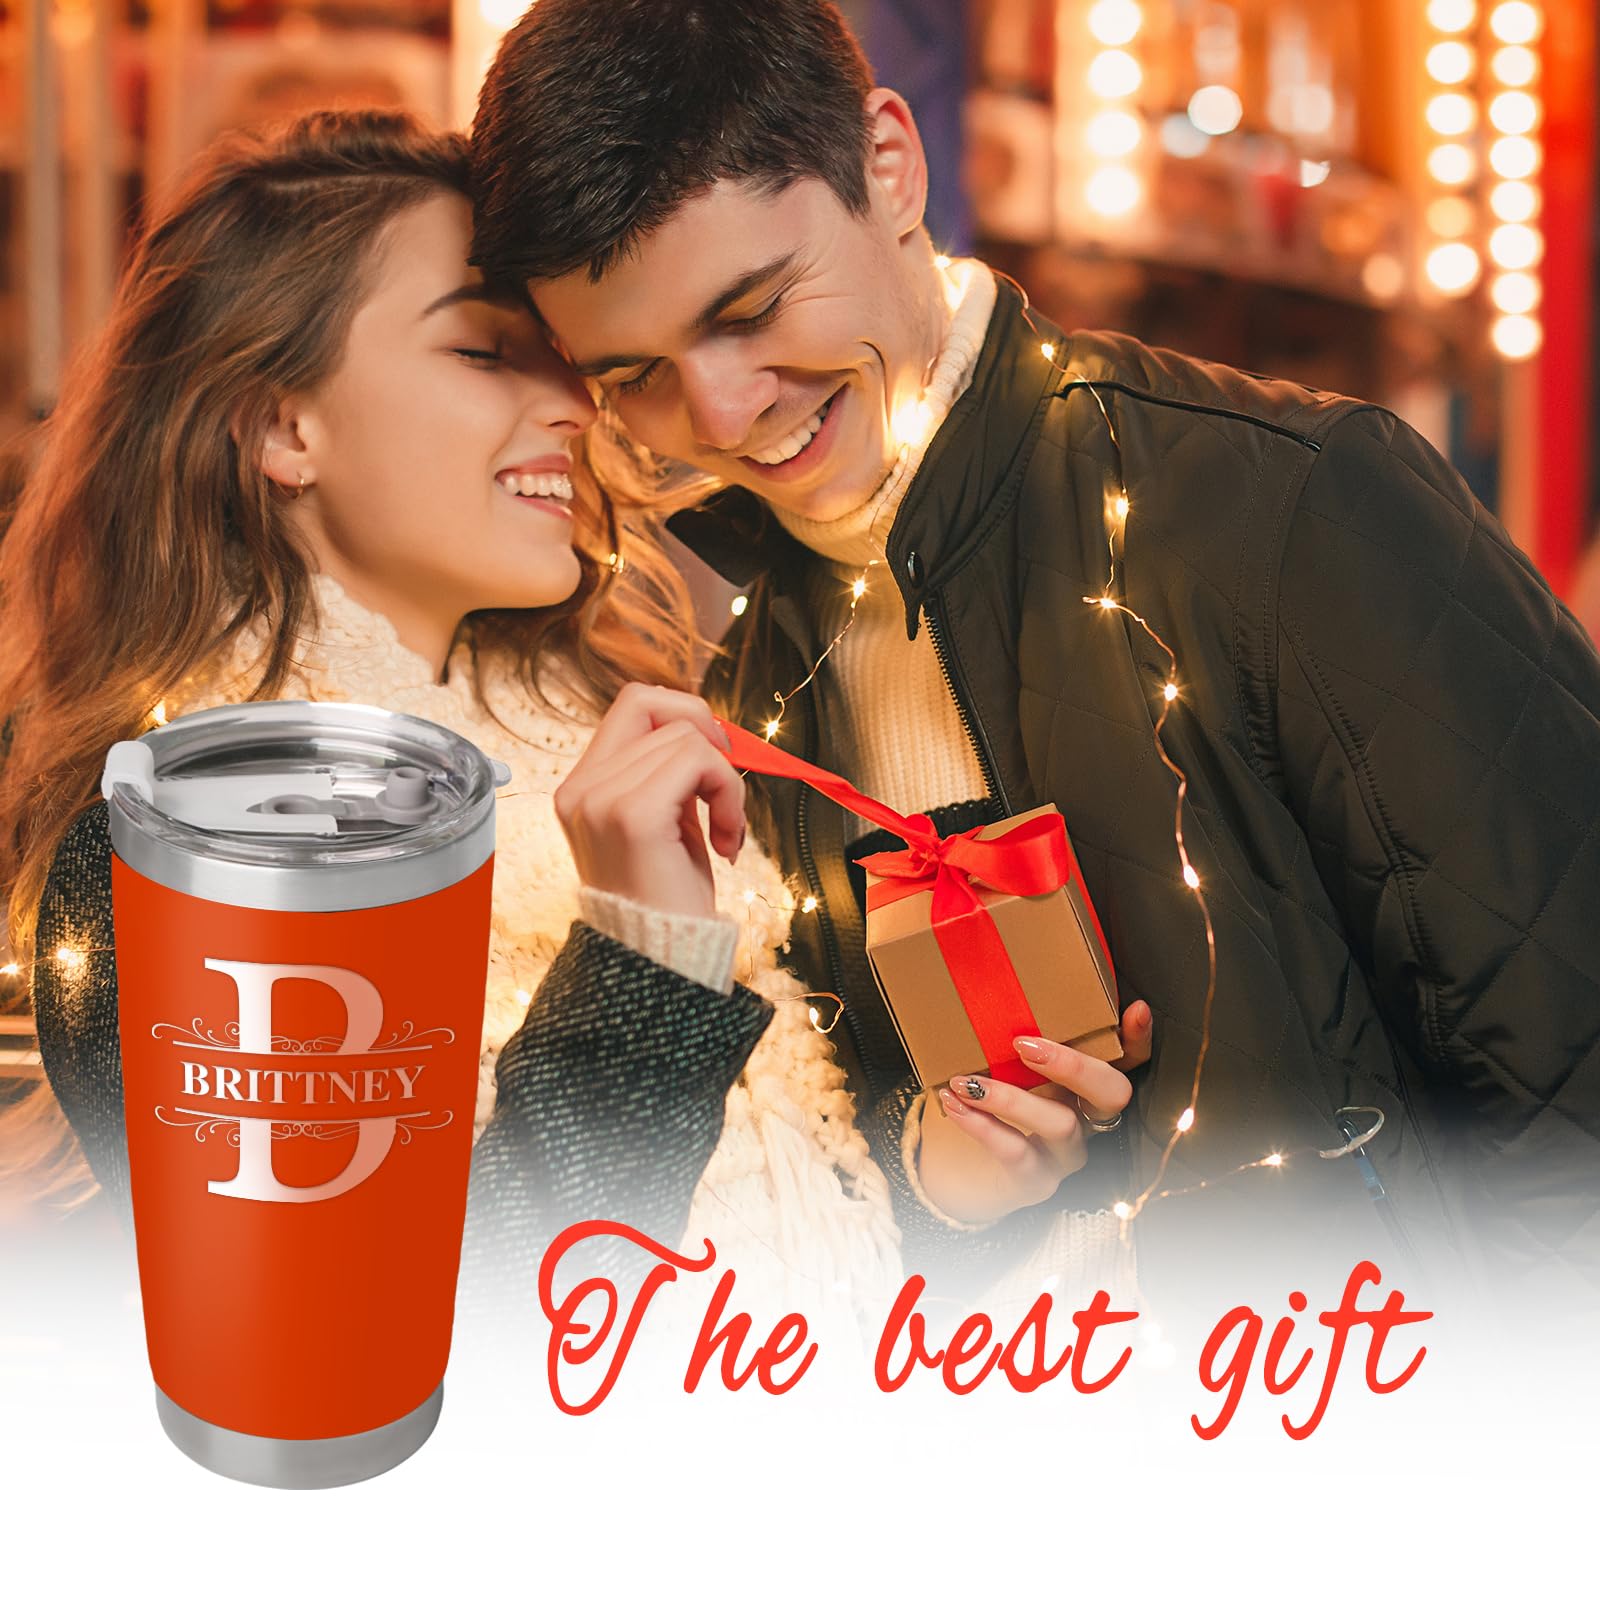 Yongqiang Personalized Tumbler with Engraved Name - 12 Designs, 20oz Tumbler w/Lid, Double Wall Insulated Travel Coffee Tumbler, Personalized Gifts for Women Men, Birthday Gifts from daughter, Son